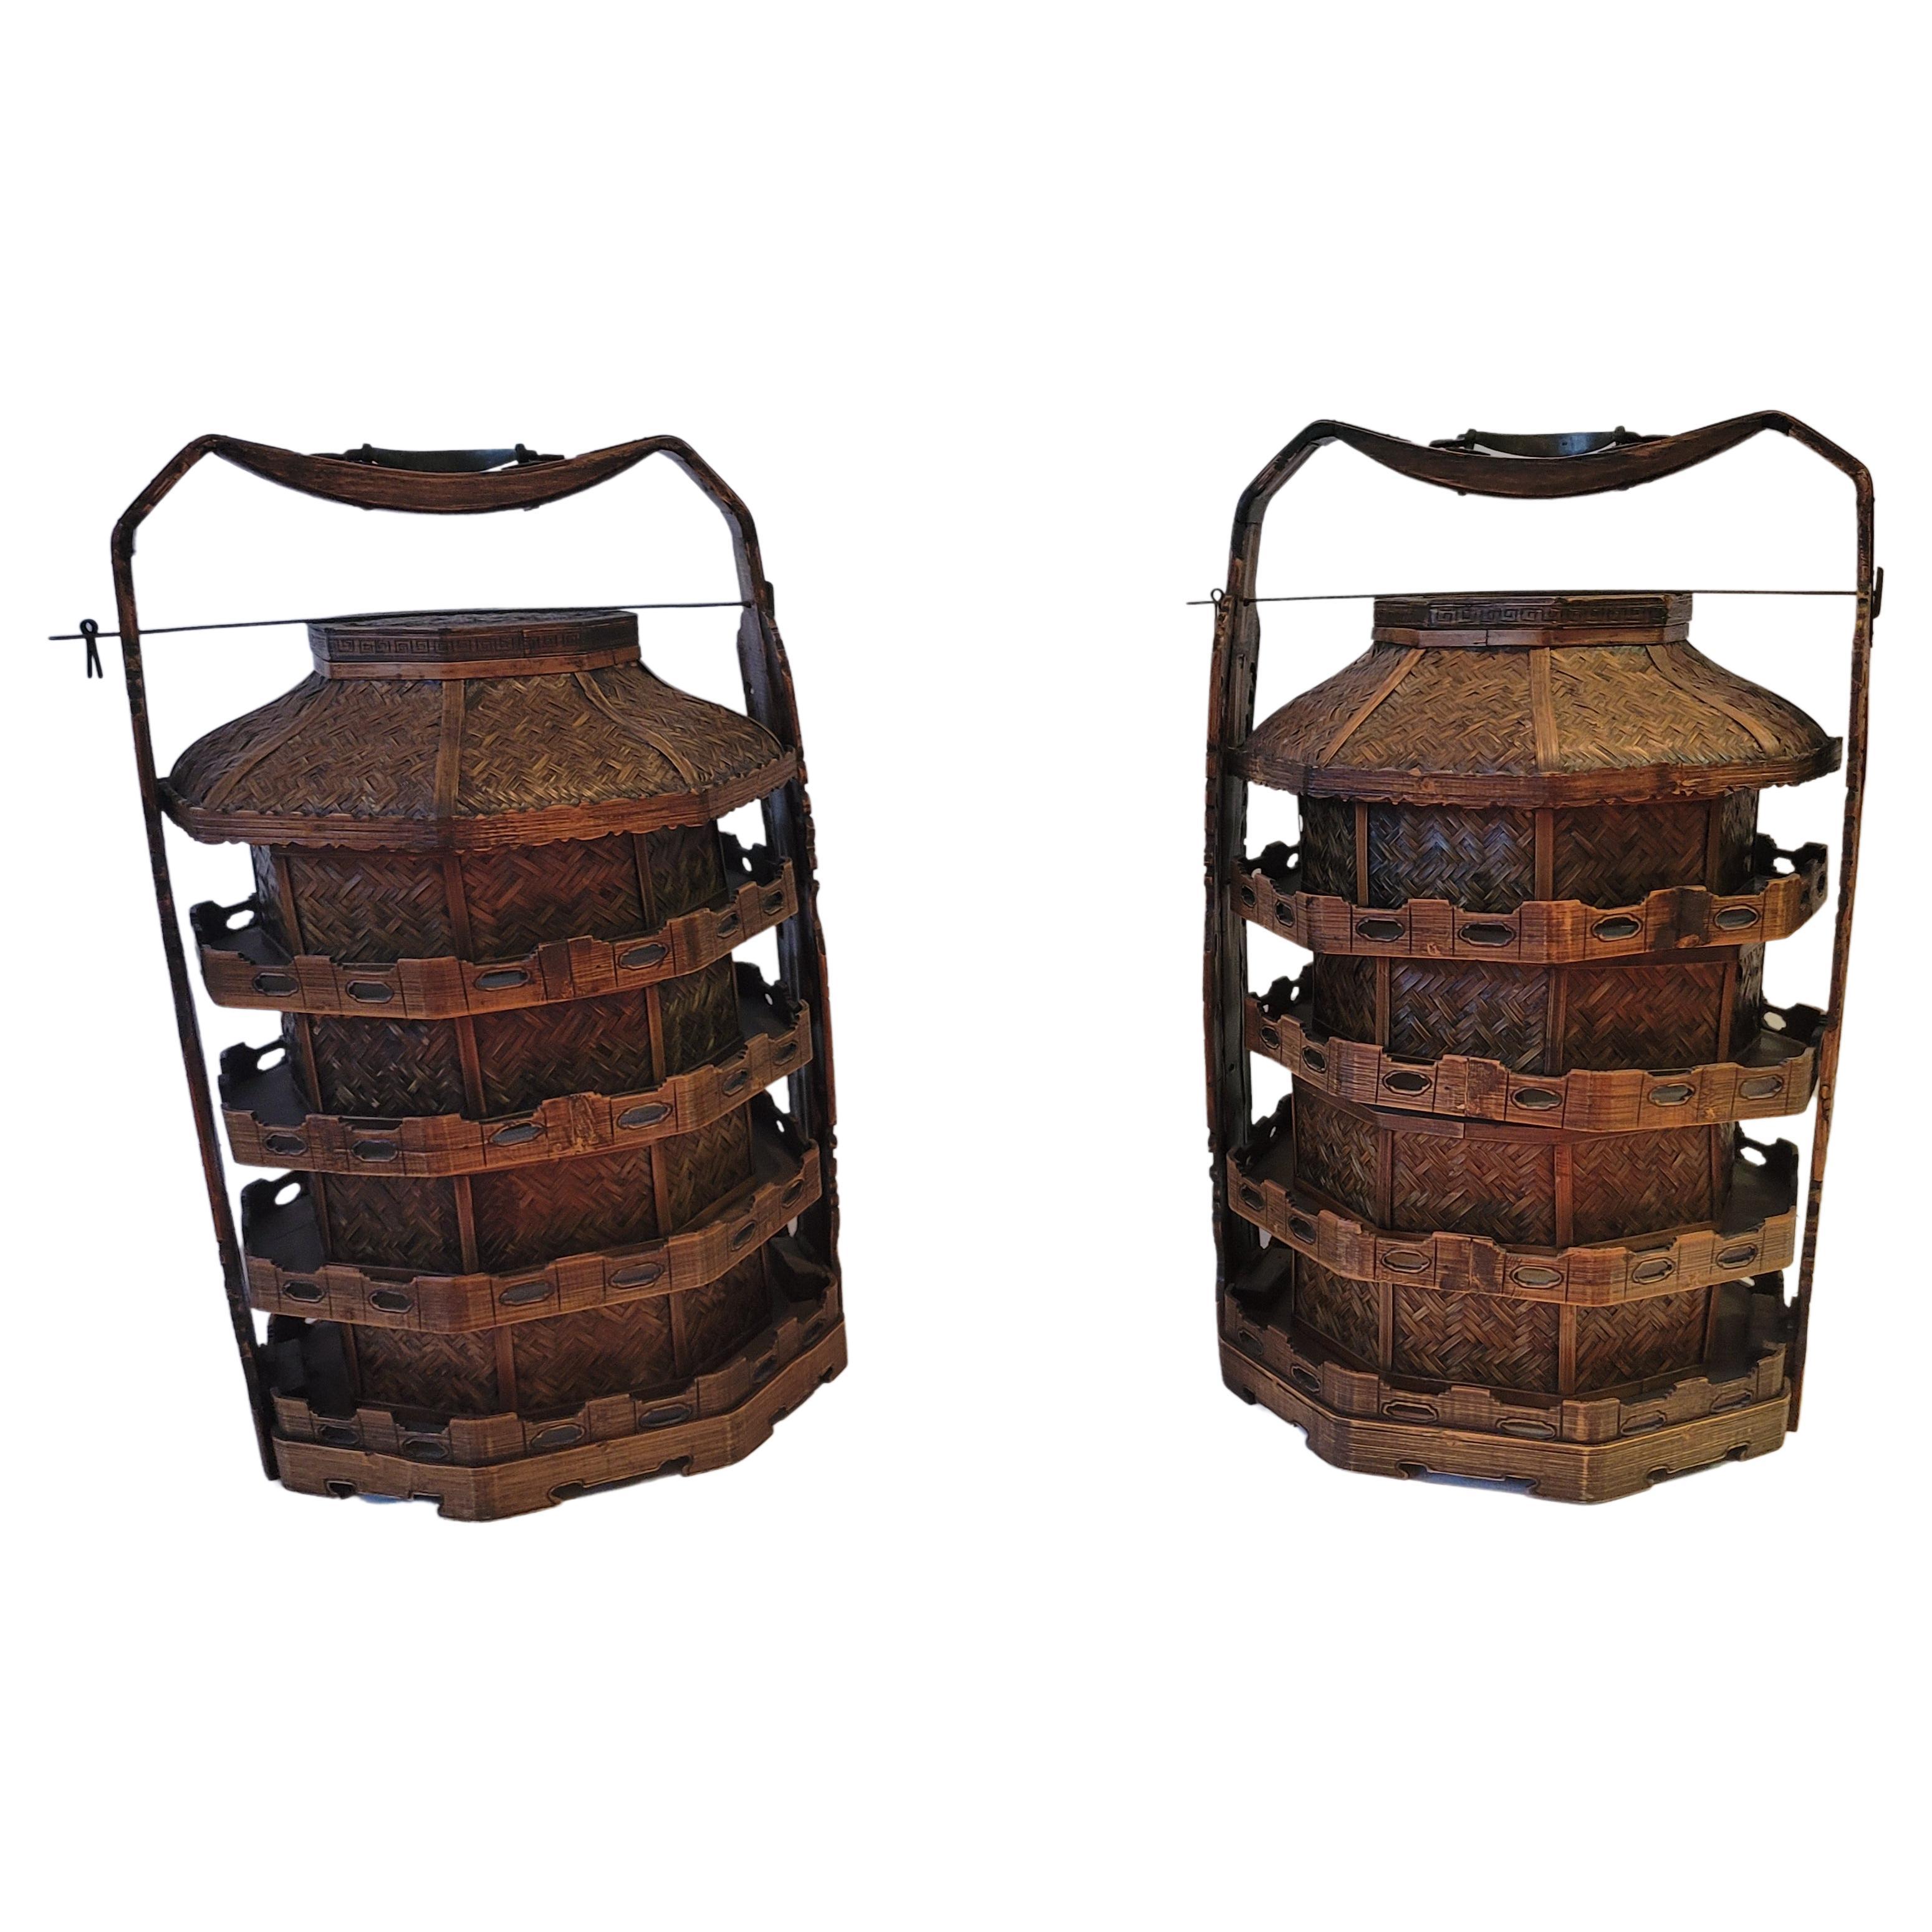 Pair of Five Tiered Baskets, 19th Century